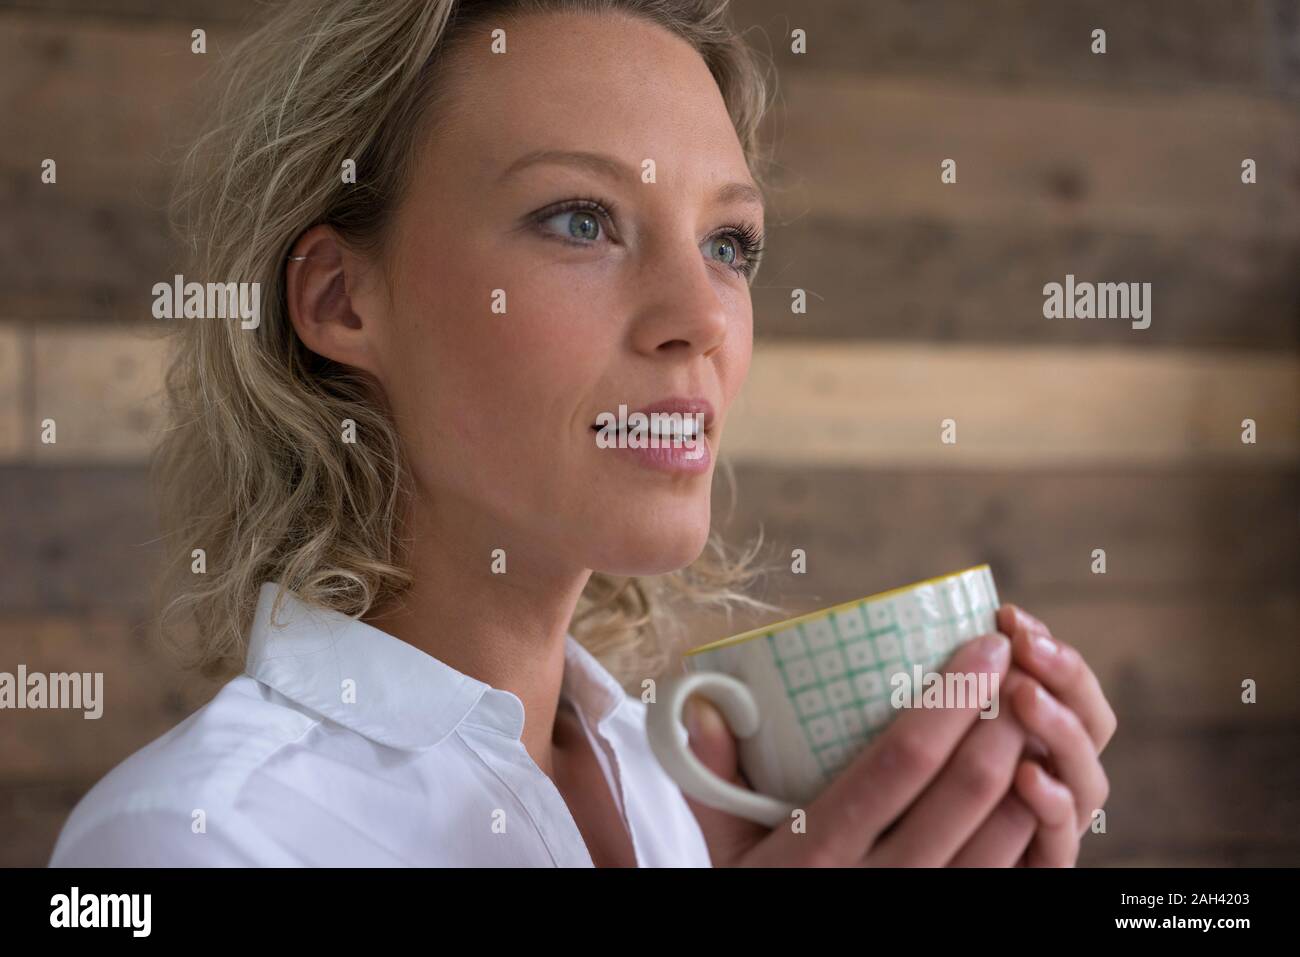 Young businesswoman holding cup of coffee looking sideways Stock Photo